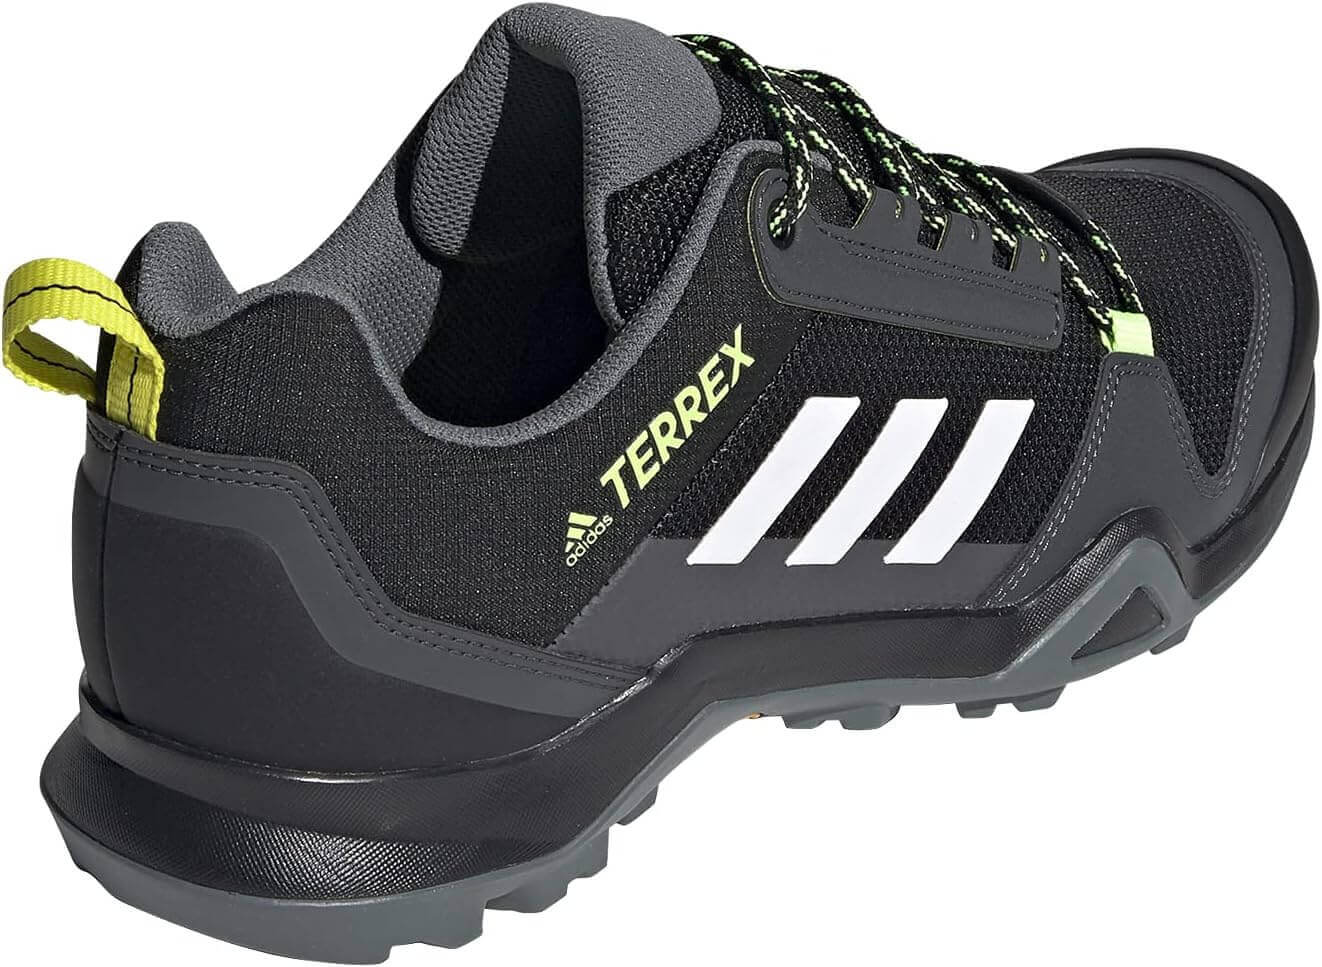 Shop The Latest >adidas Outdoor Men's Terrex Ax3 Trail Running Shoe > *Only $120.66*> From The Top Brand > *adidasl* > Shop Now and Get Free Shipping On Orders Over $45.00 >*Shop Earth Foot*